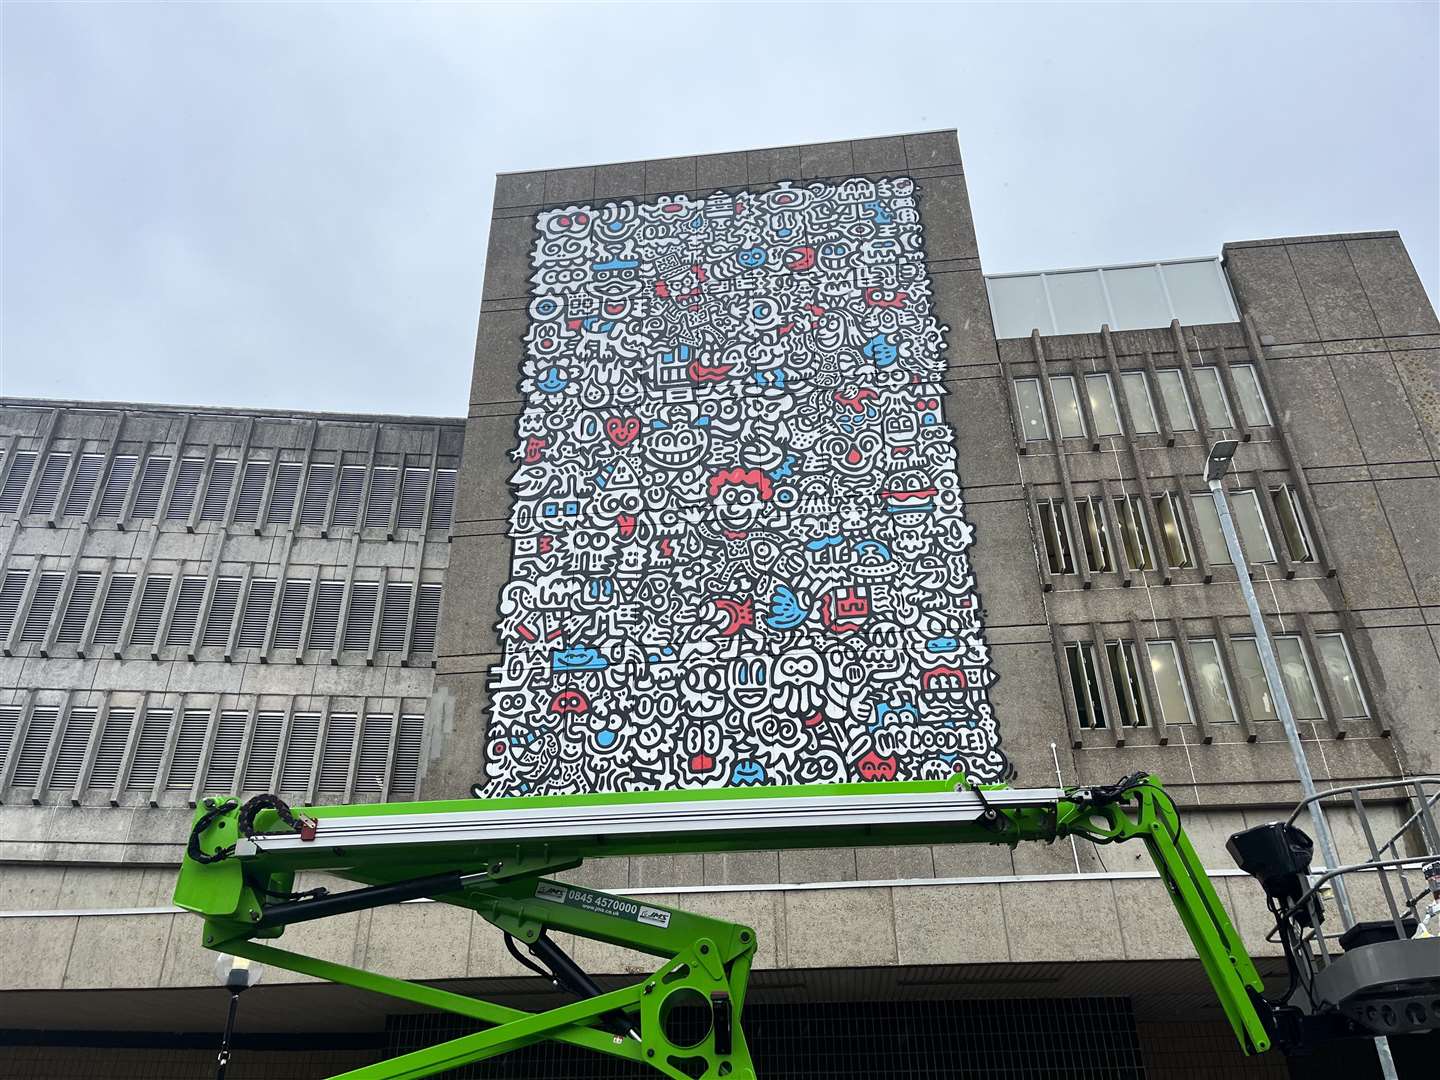 A mural by Mr Doodle features on the side of the car park as part of the Ashford UNFRAMED trail